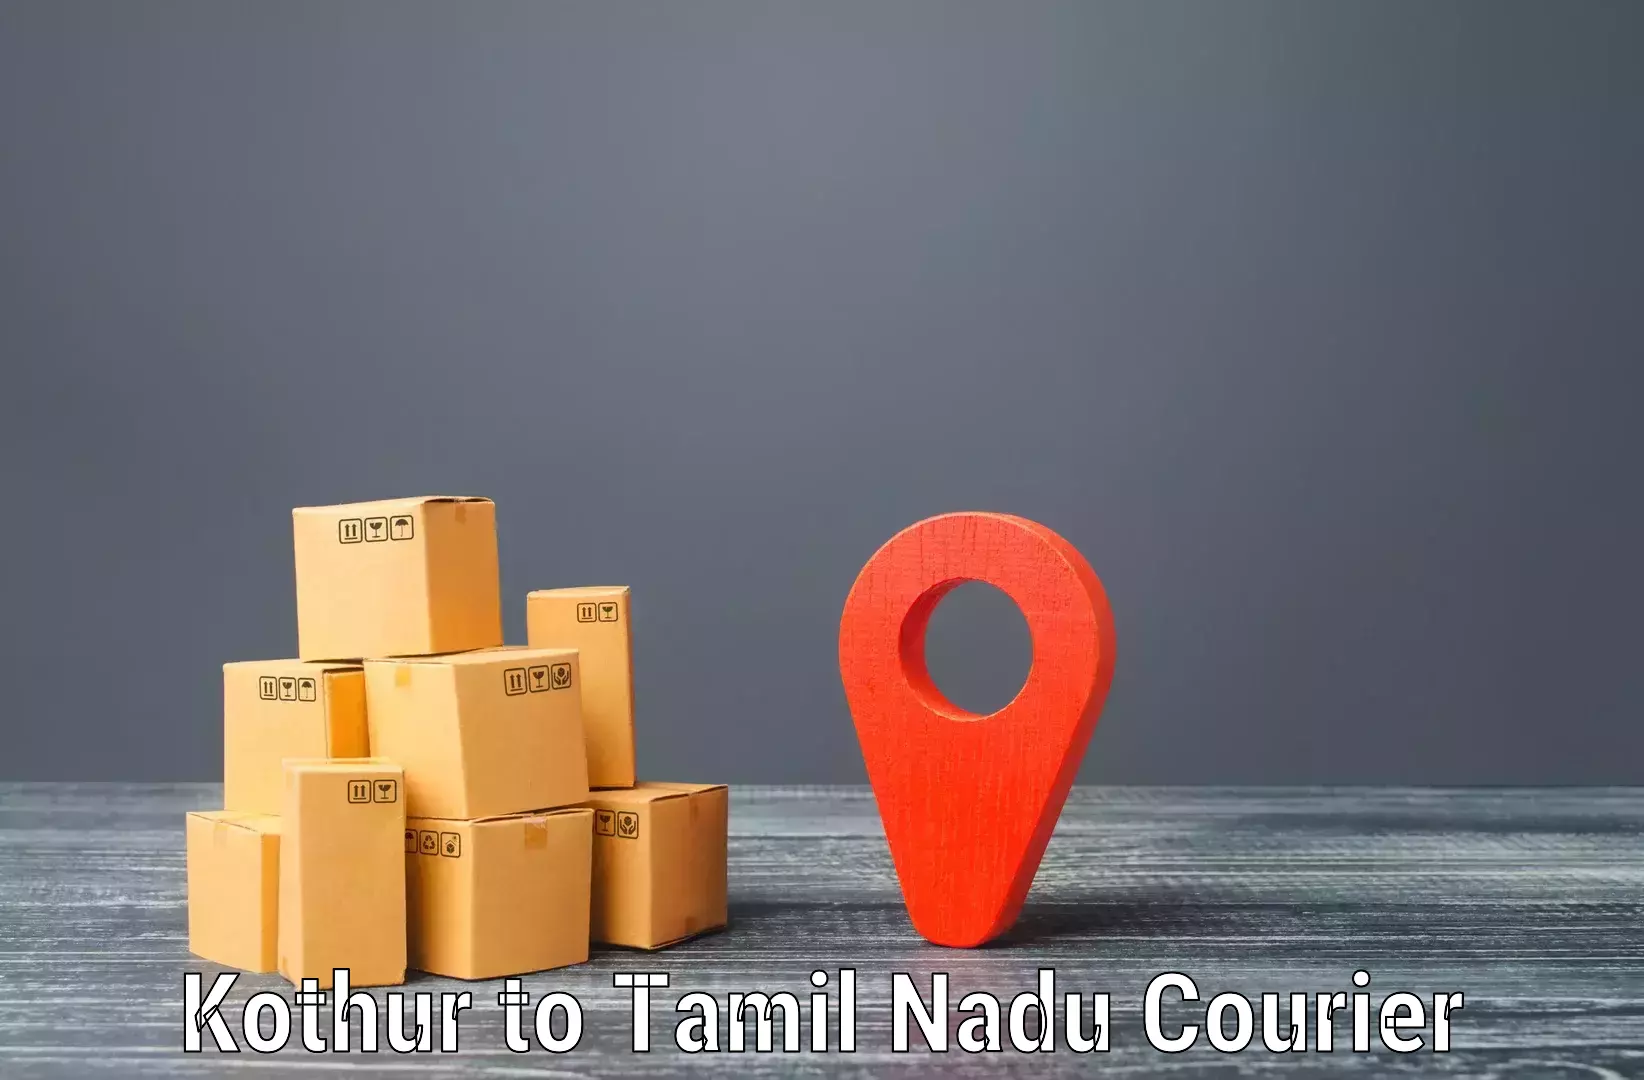 Cost-effective courier options Kothur to Ennore Port Chennai